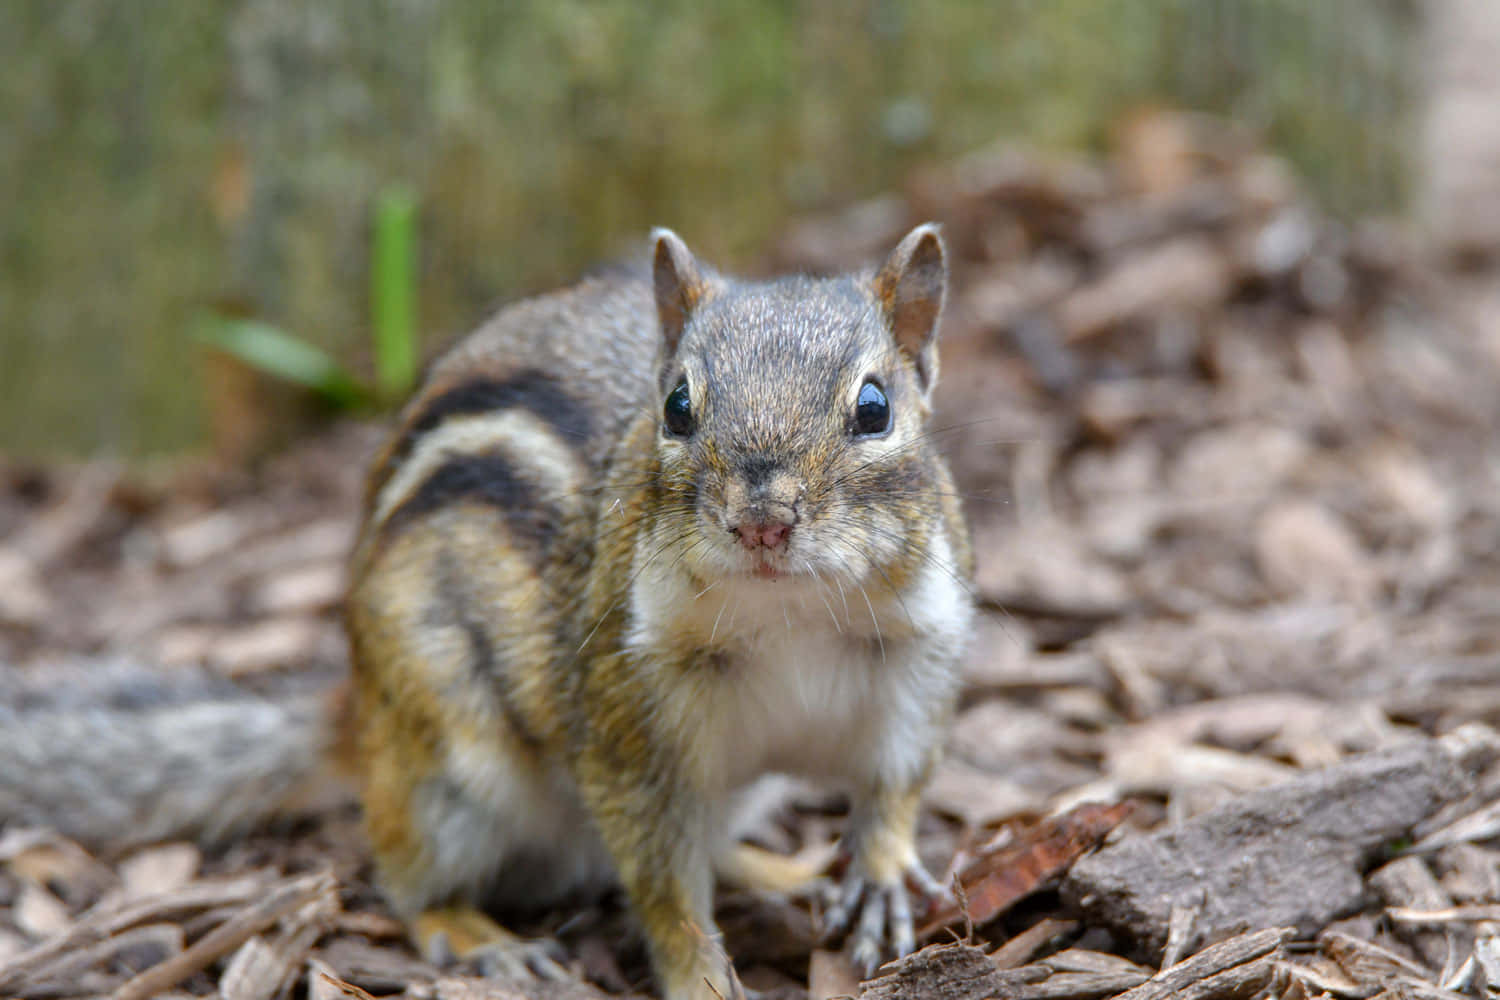 A friendly chipmunk stands ready to greet you